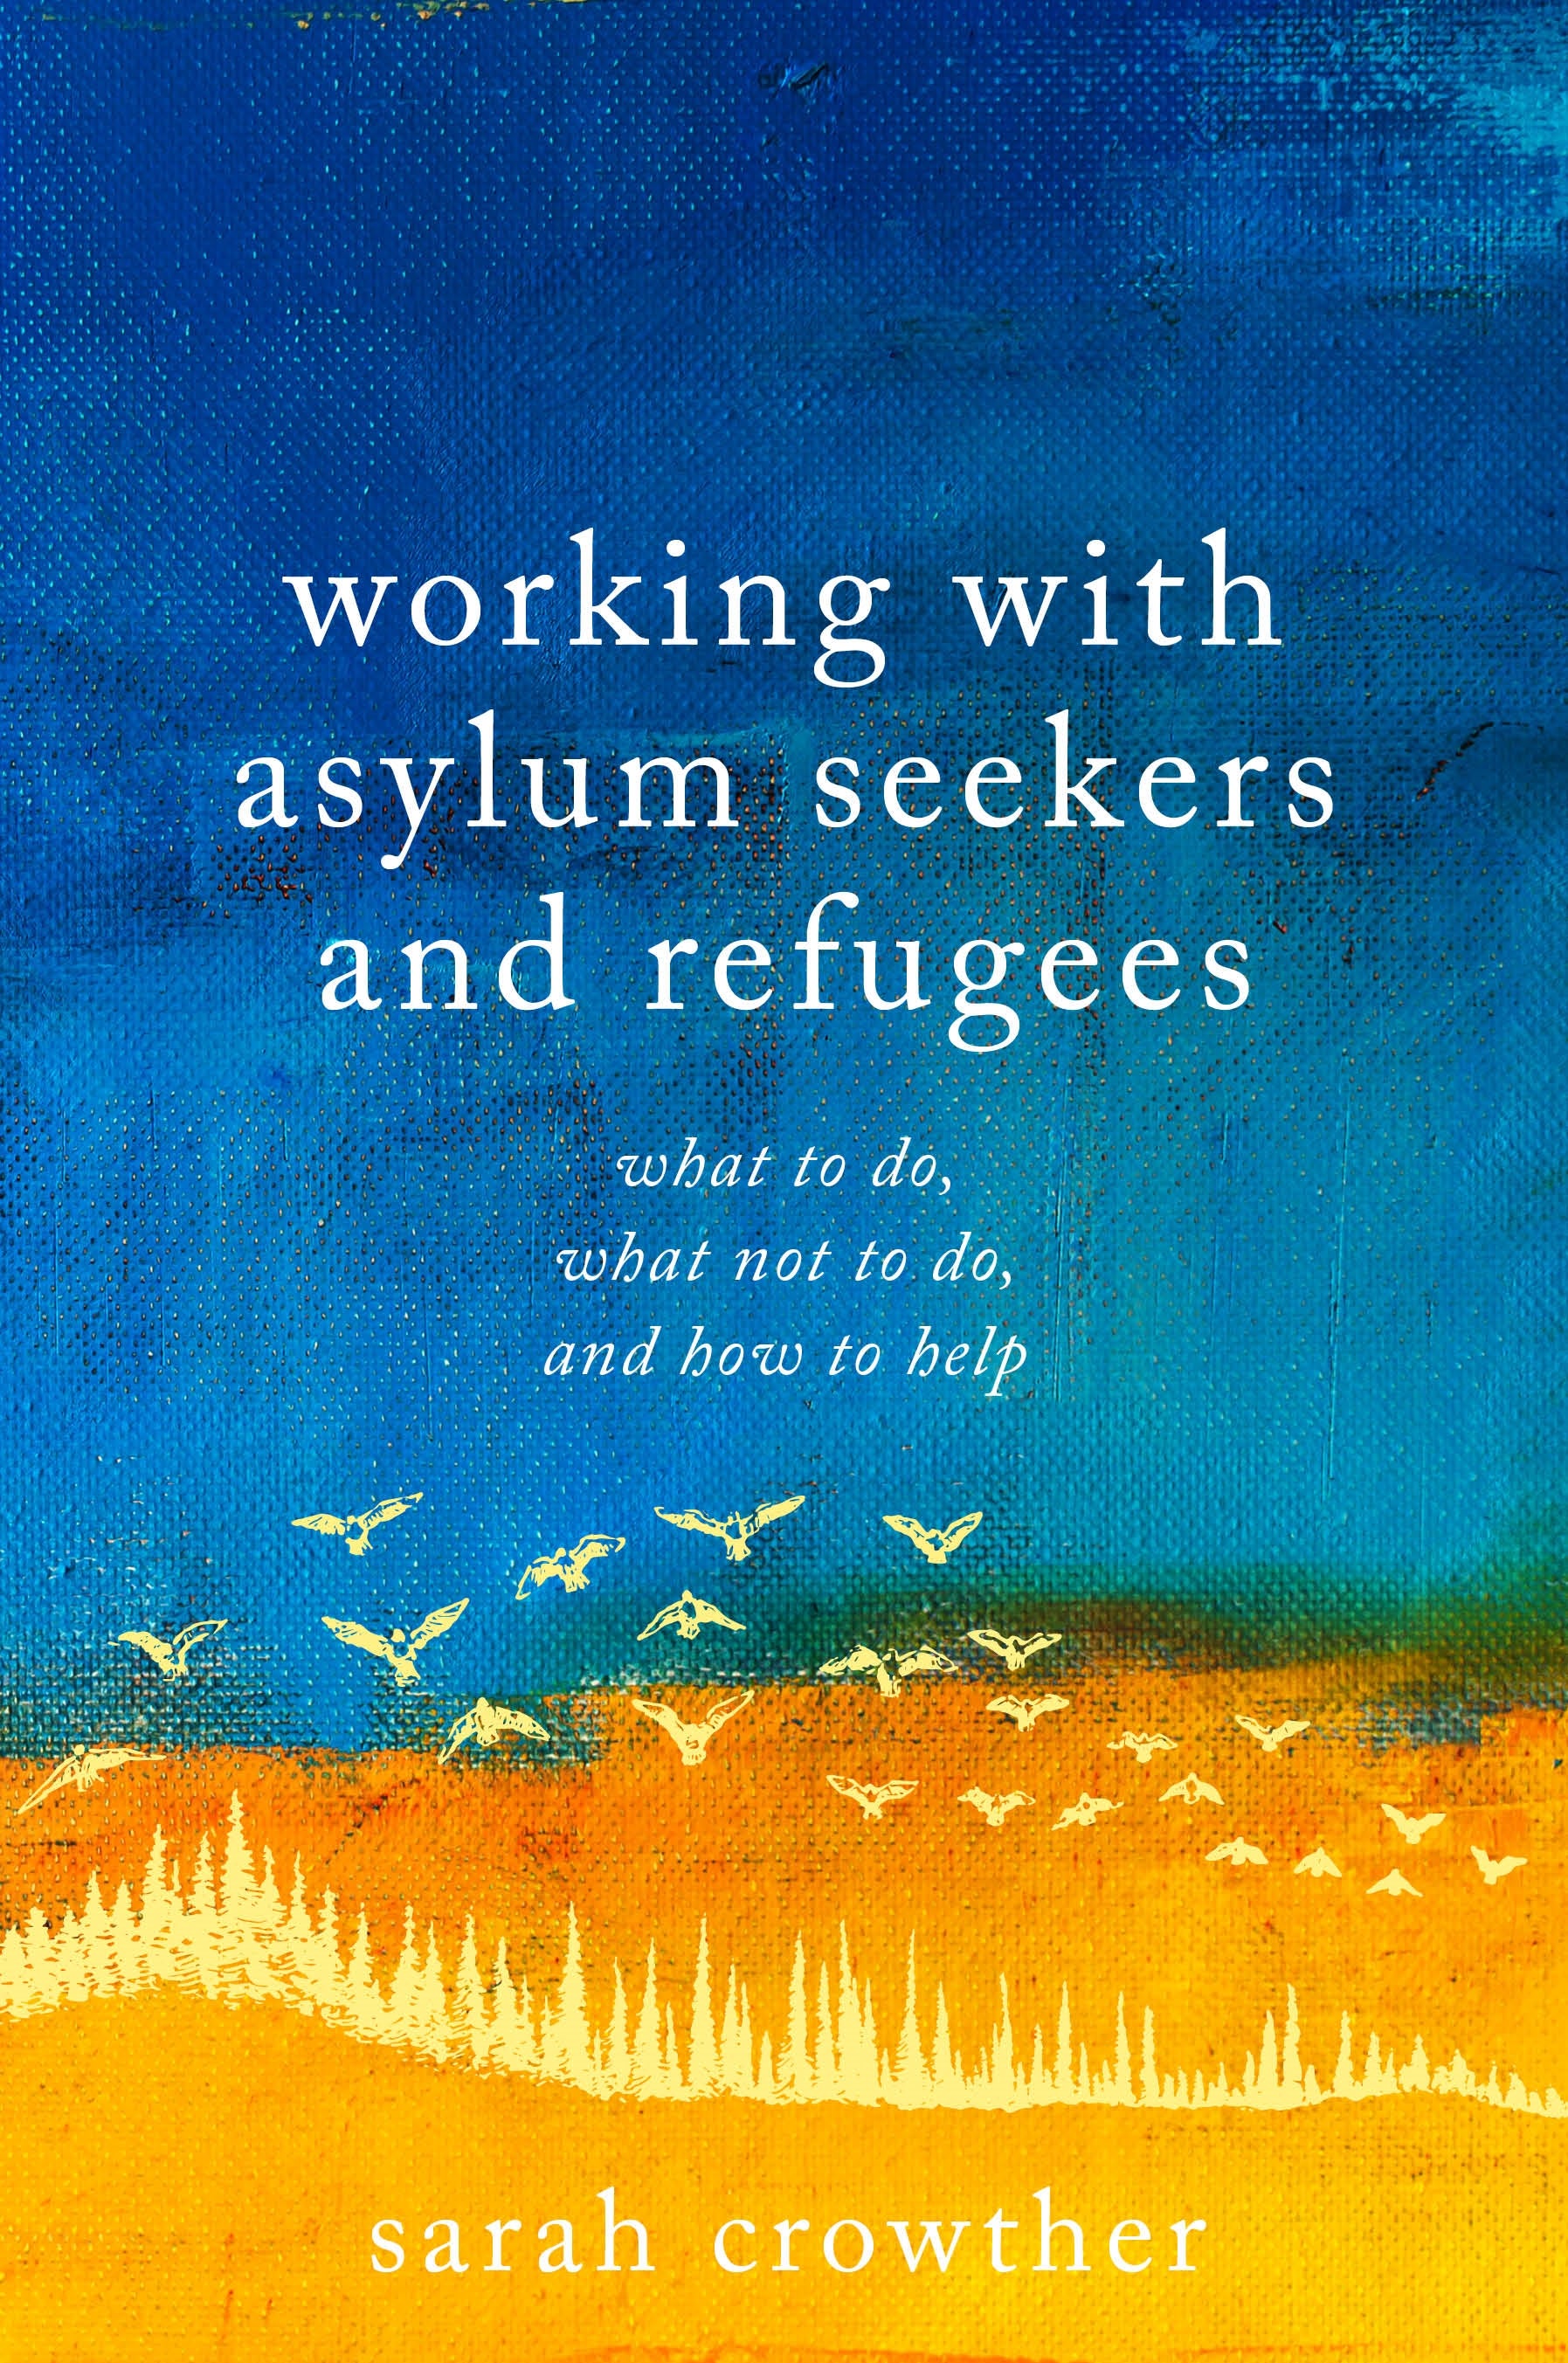 Working with Asylum Seekers and Refugees by Sarah Crowther, Debora Singer MBE